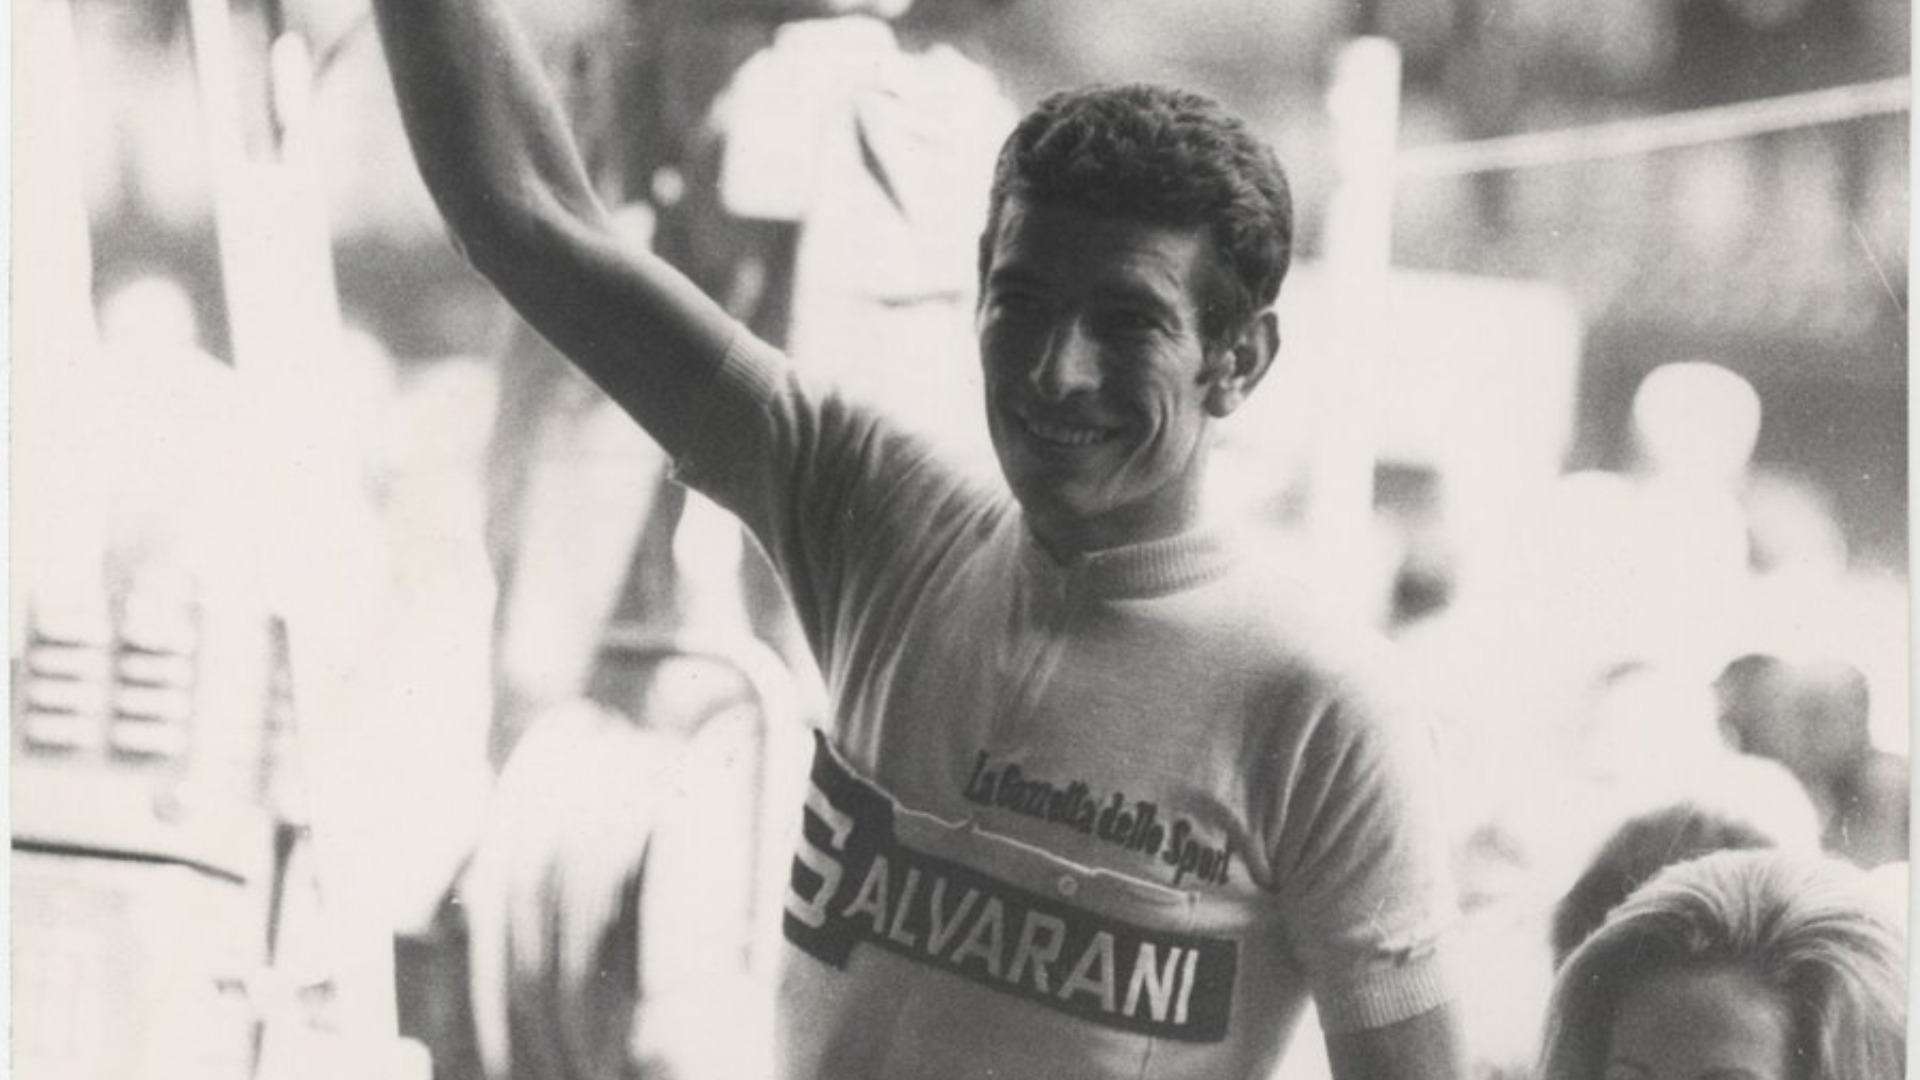 Felice Gimondi, a winner of the General Classification at the Tour de France, Giro d'Italia and Vuelta a Espana, has died.